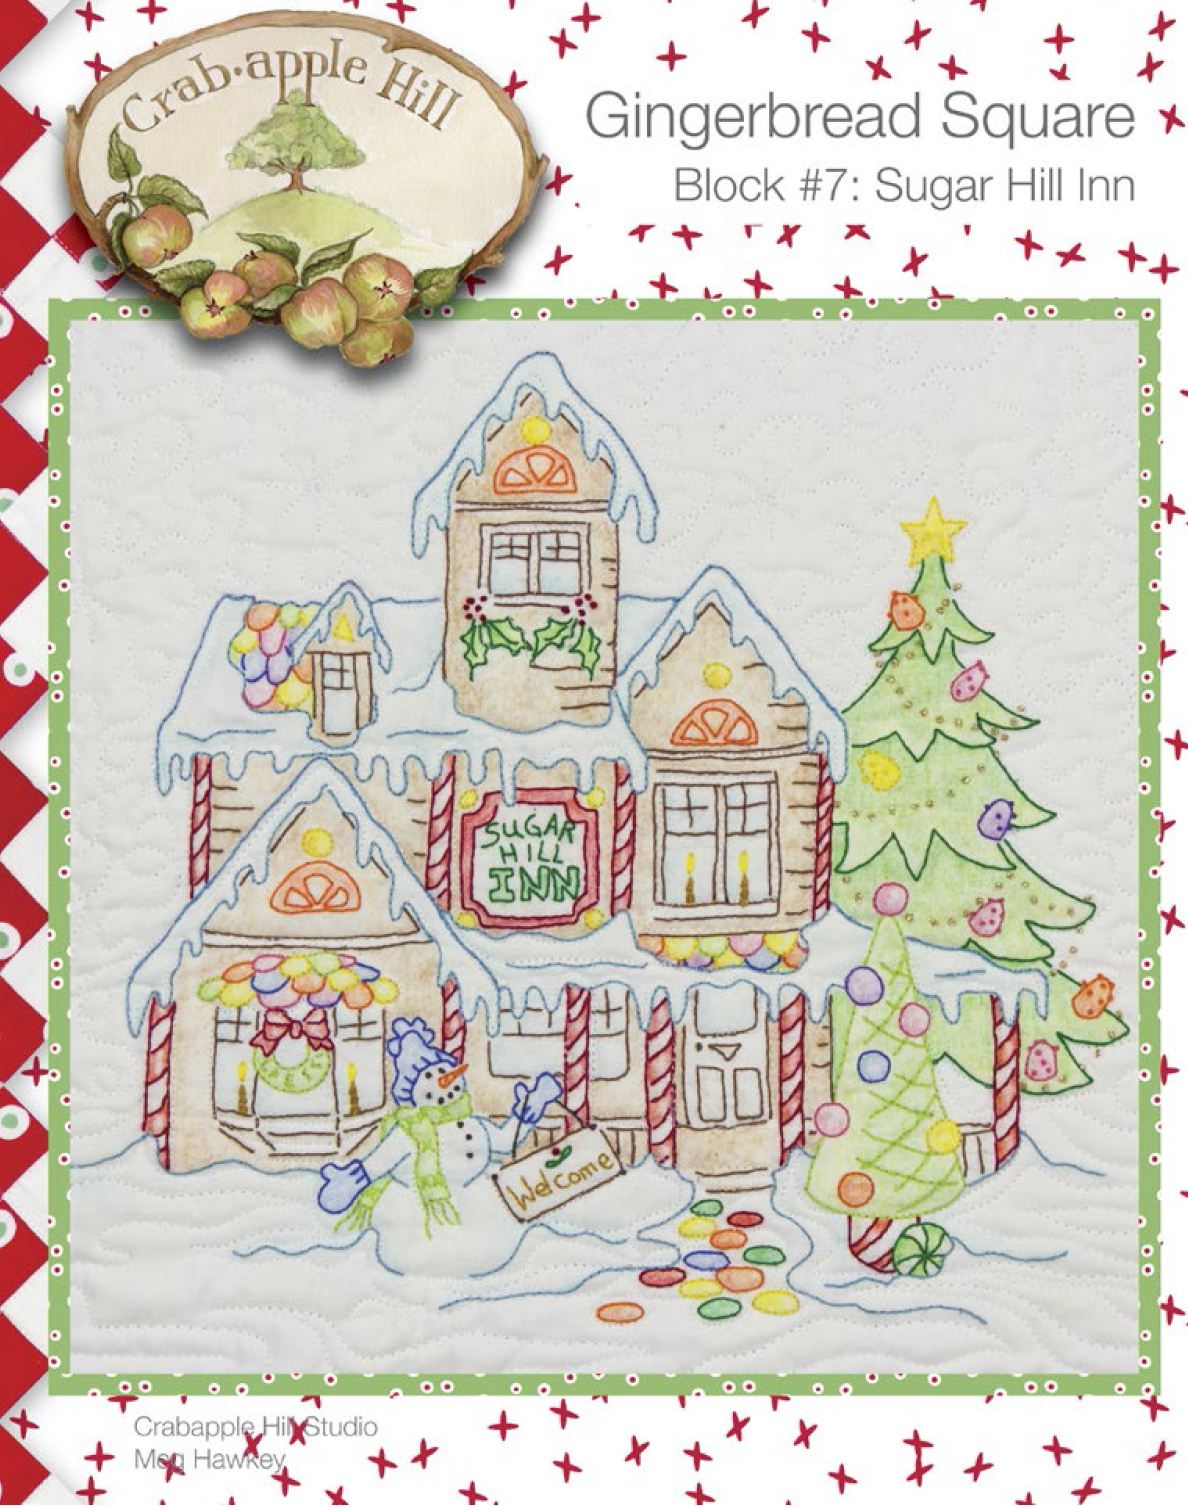 Crabapple Hill Embroidery Patterns Crabapple Hill Designs Checker News Blog